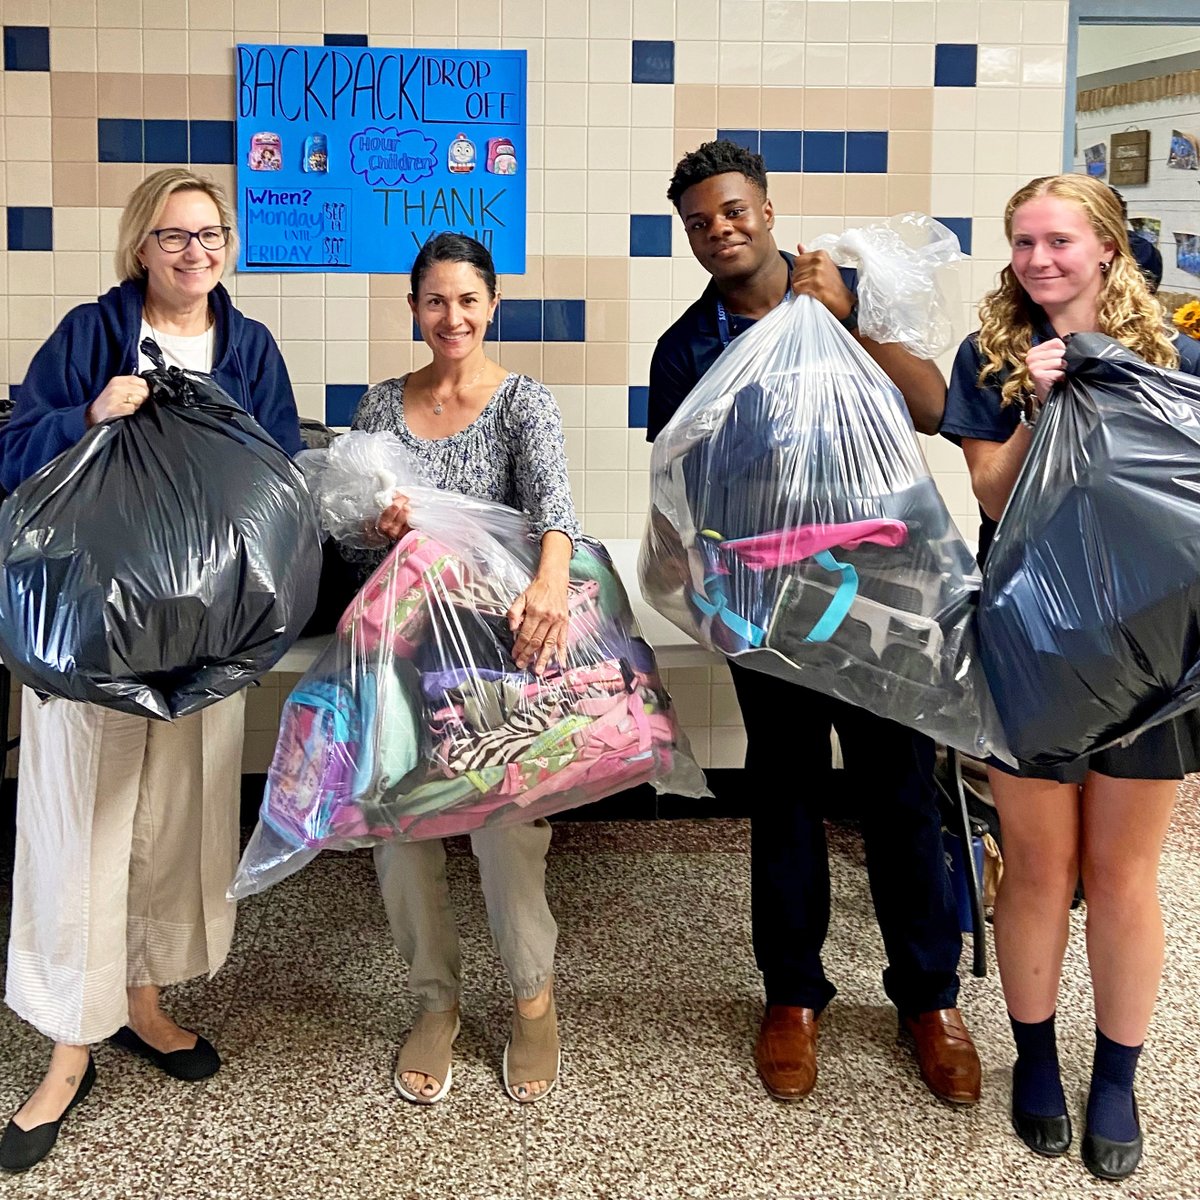 Last month, seniors worked w/ Campus Ministry to donate 70 backpacks & lunchboxes to Hour Children, which supports women and their families during & after incarceration. Tarik Lajoie ’23 shares, 'This was an opportunity to live the Marist pillars of Love of Work & Family Spirit.”